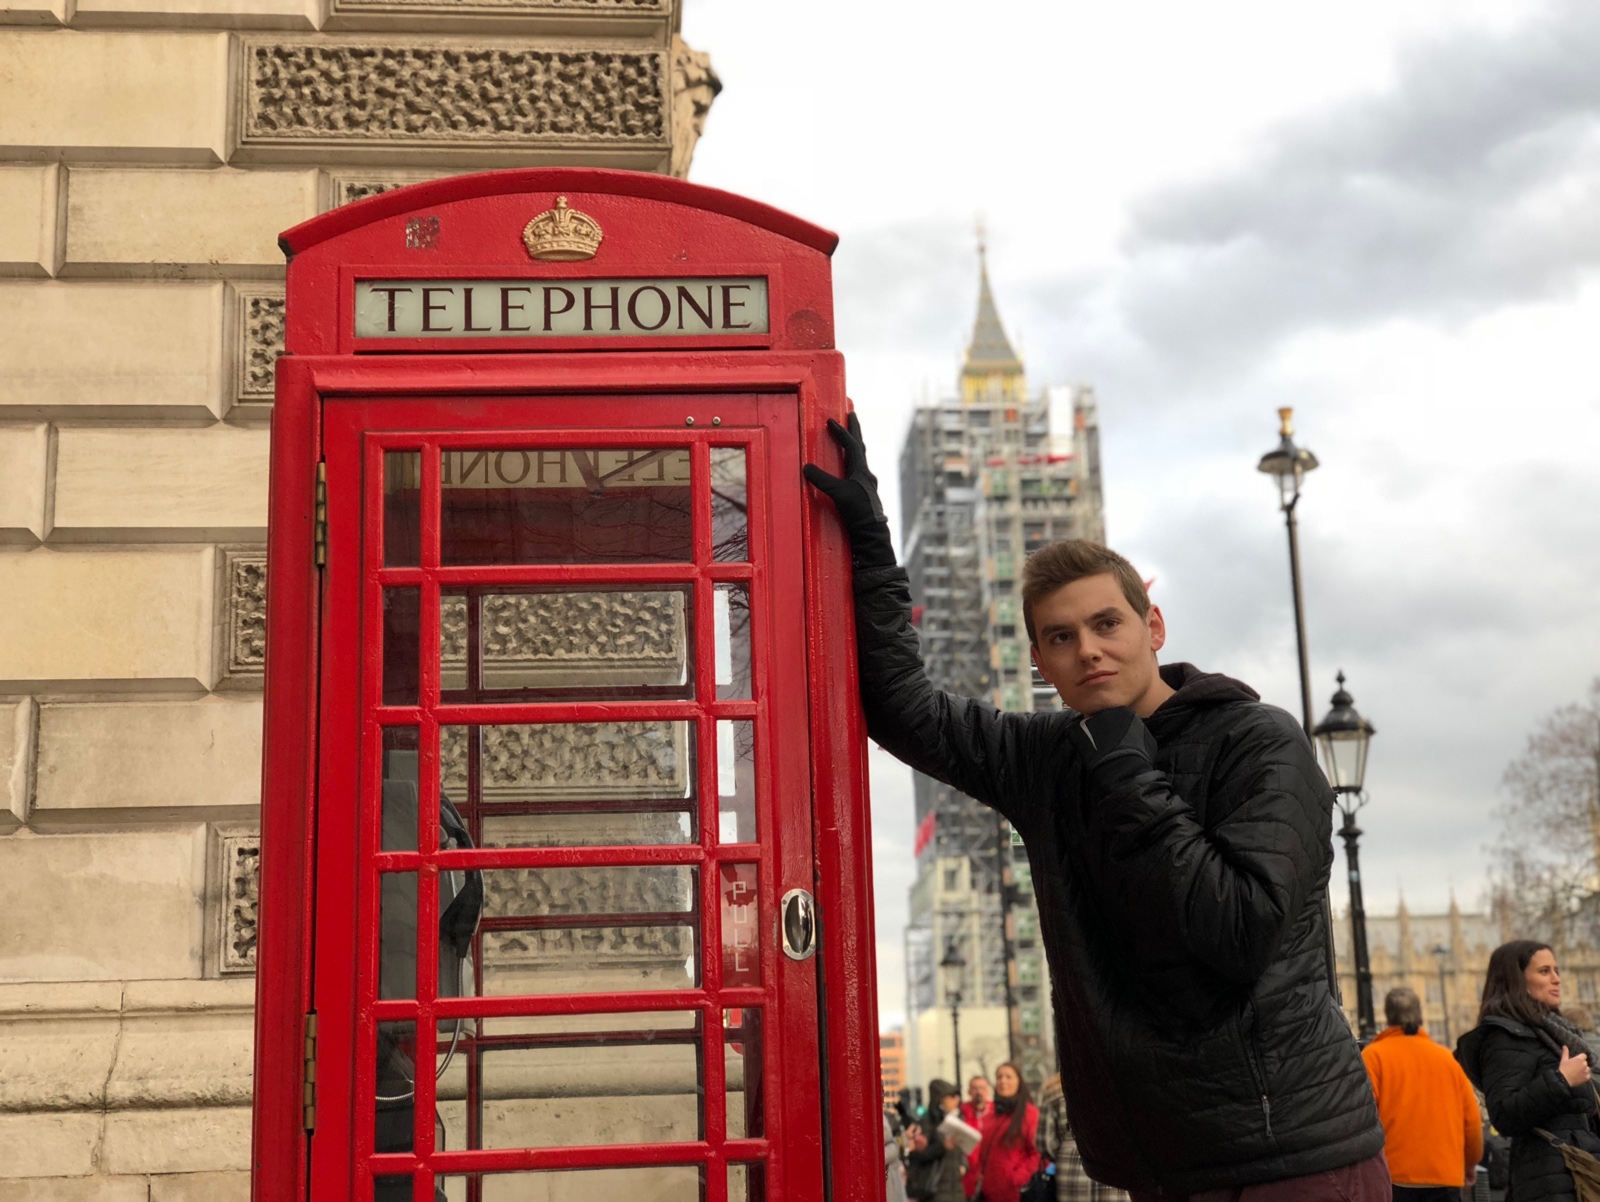 AIFS Abroad student in London, England